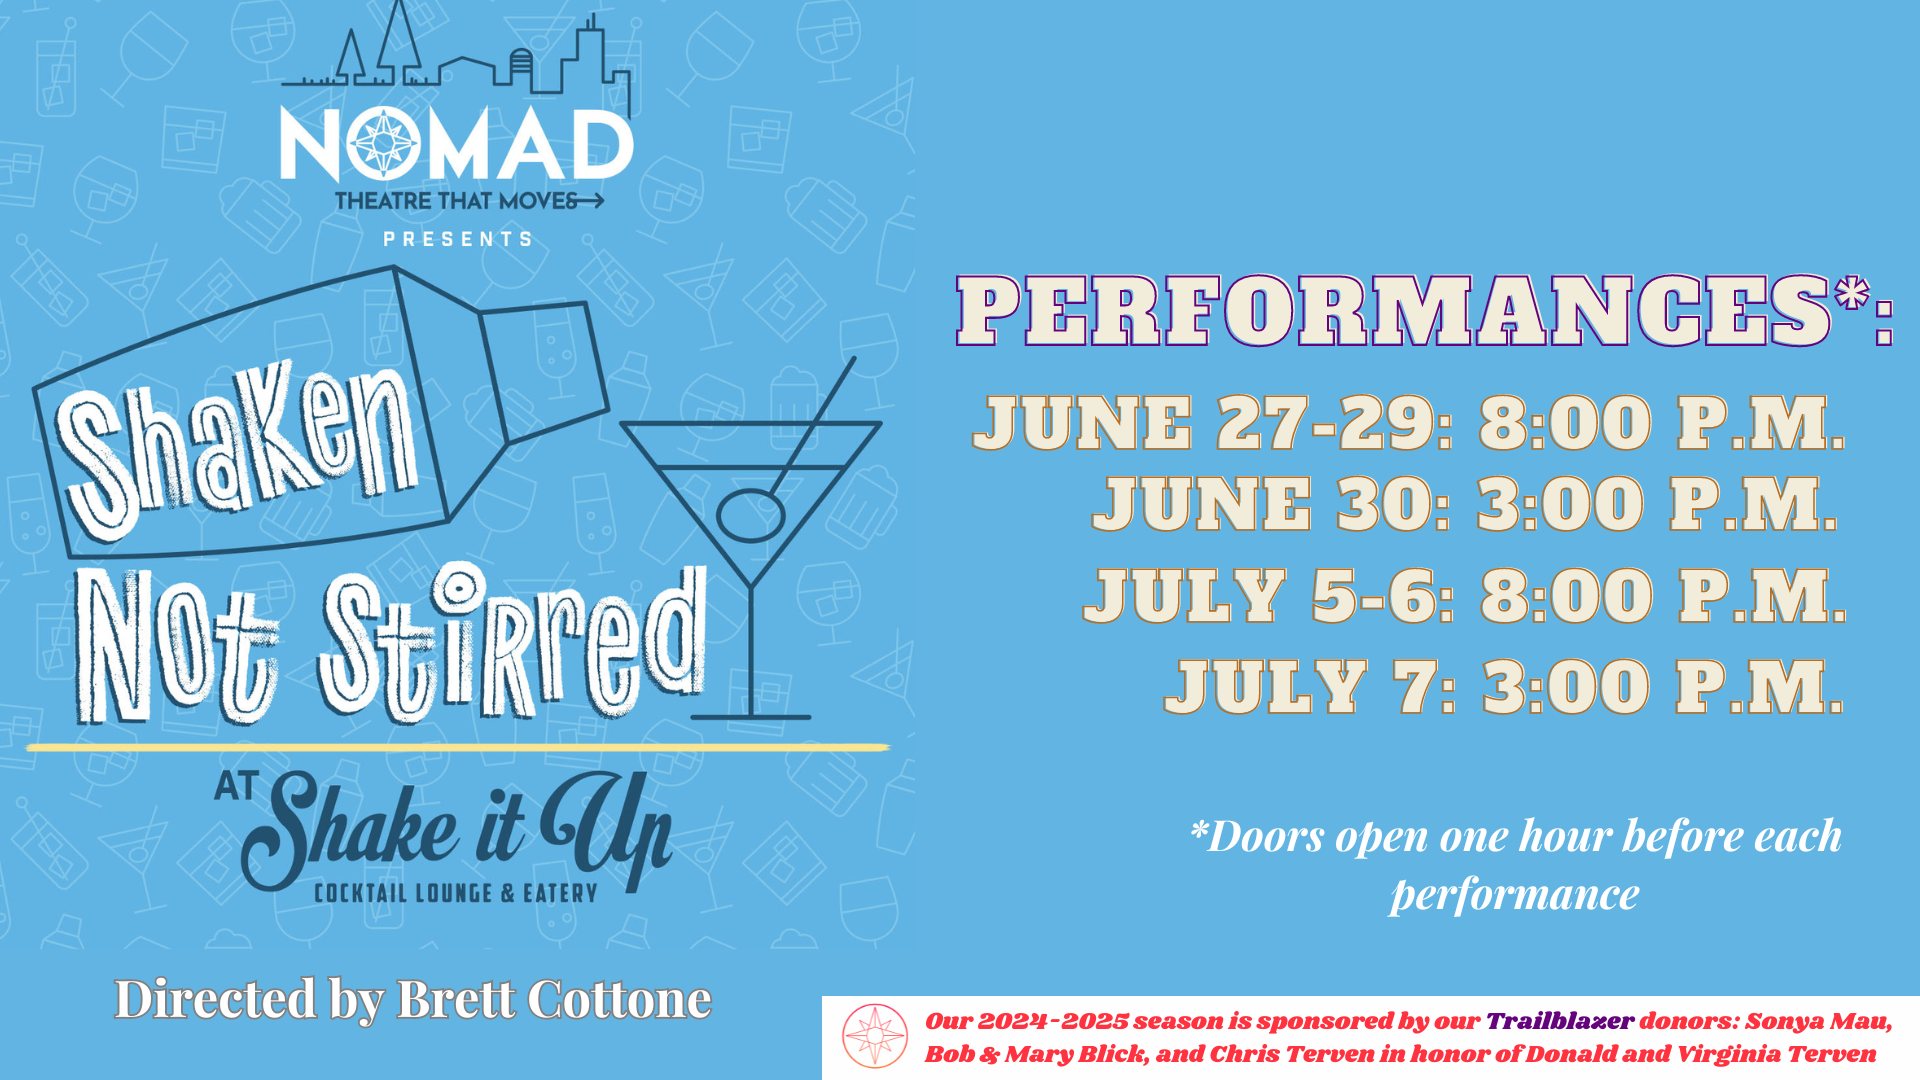 Nomad Theatre Presents "Shaken Not Stirred" The Bar Plays